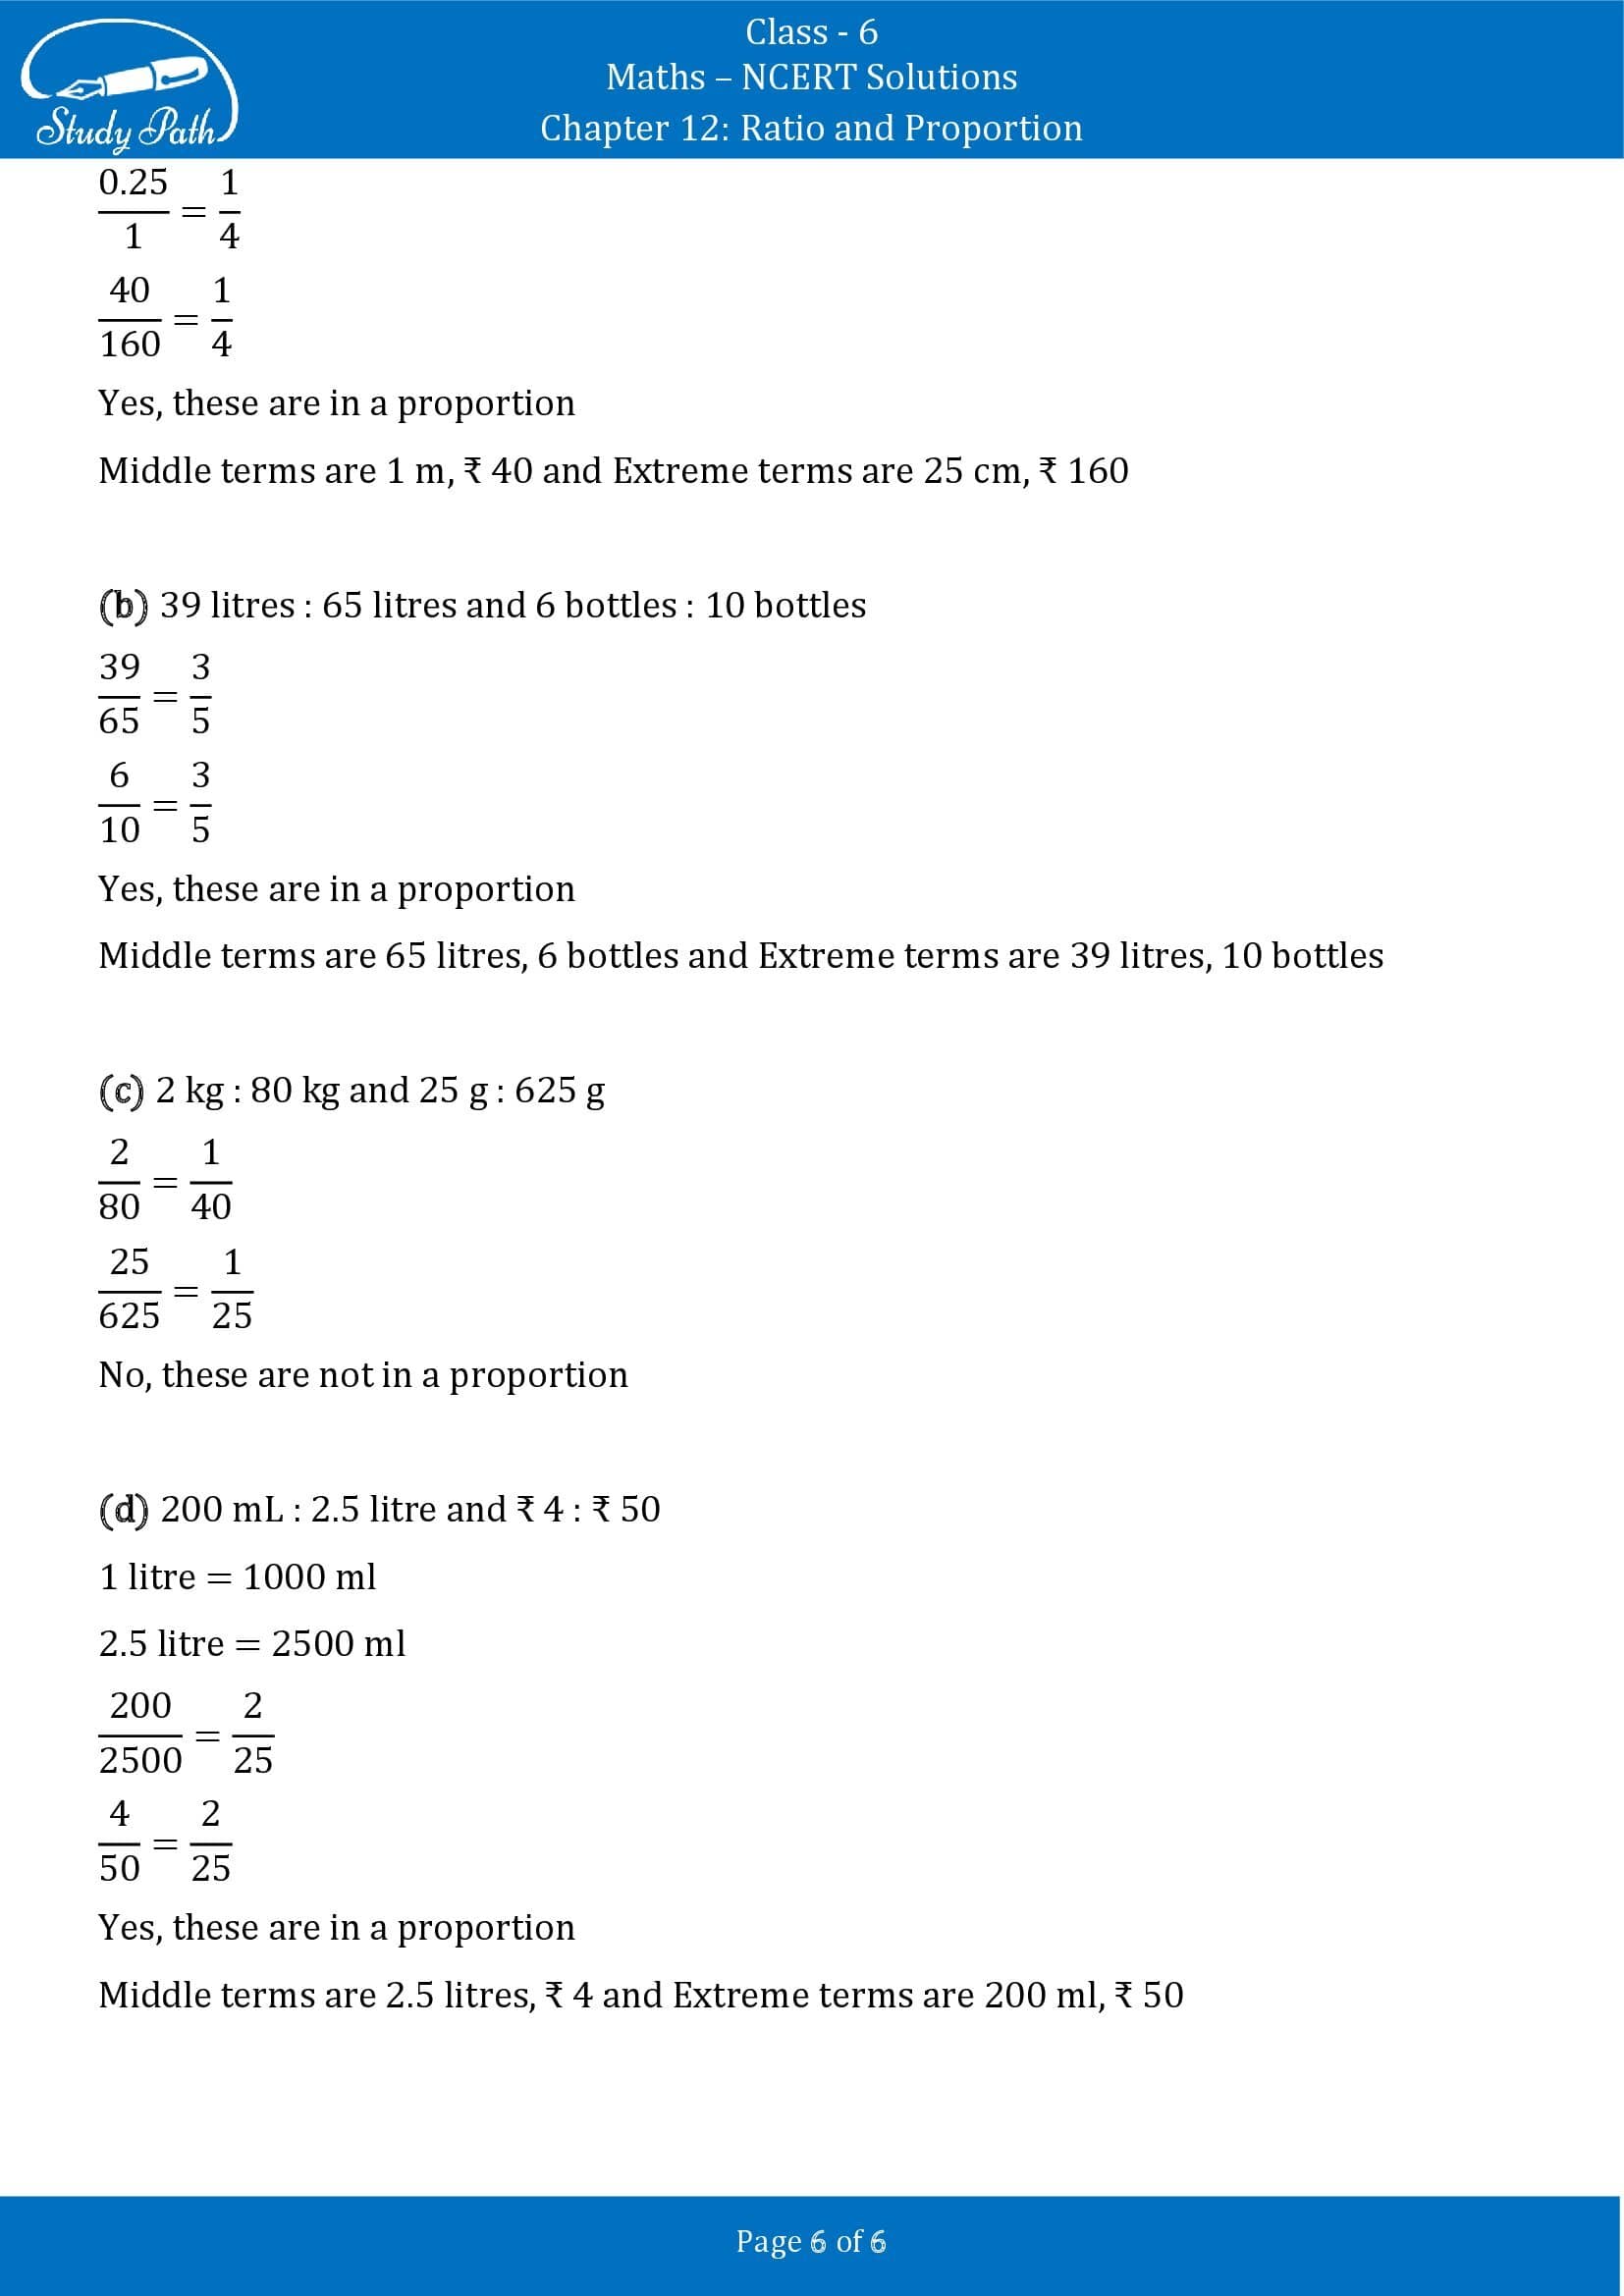 NCERT Solutions for Class 6 Maths Chapter 12 Ratio and Proportion Exercise 12.2 00006